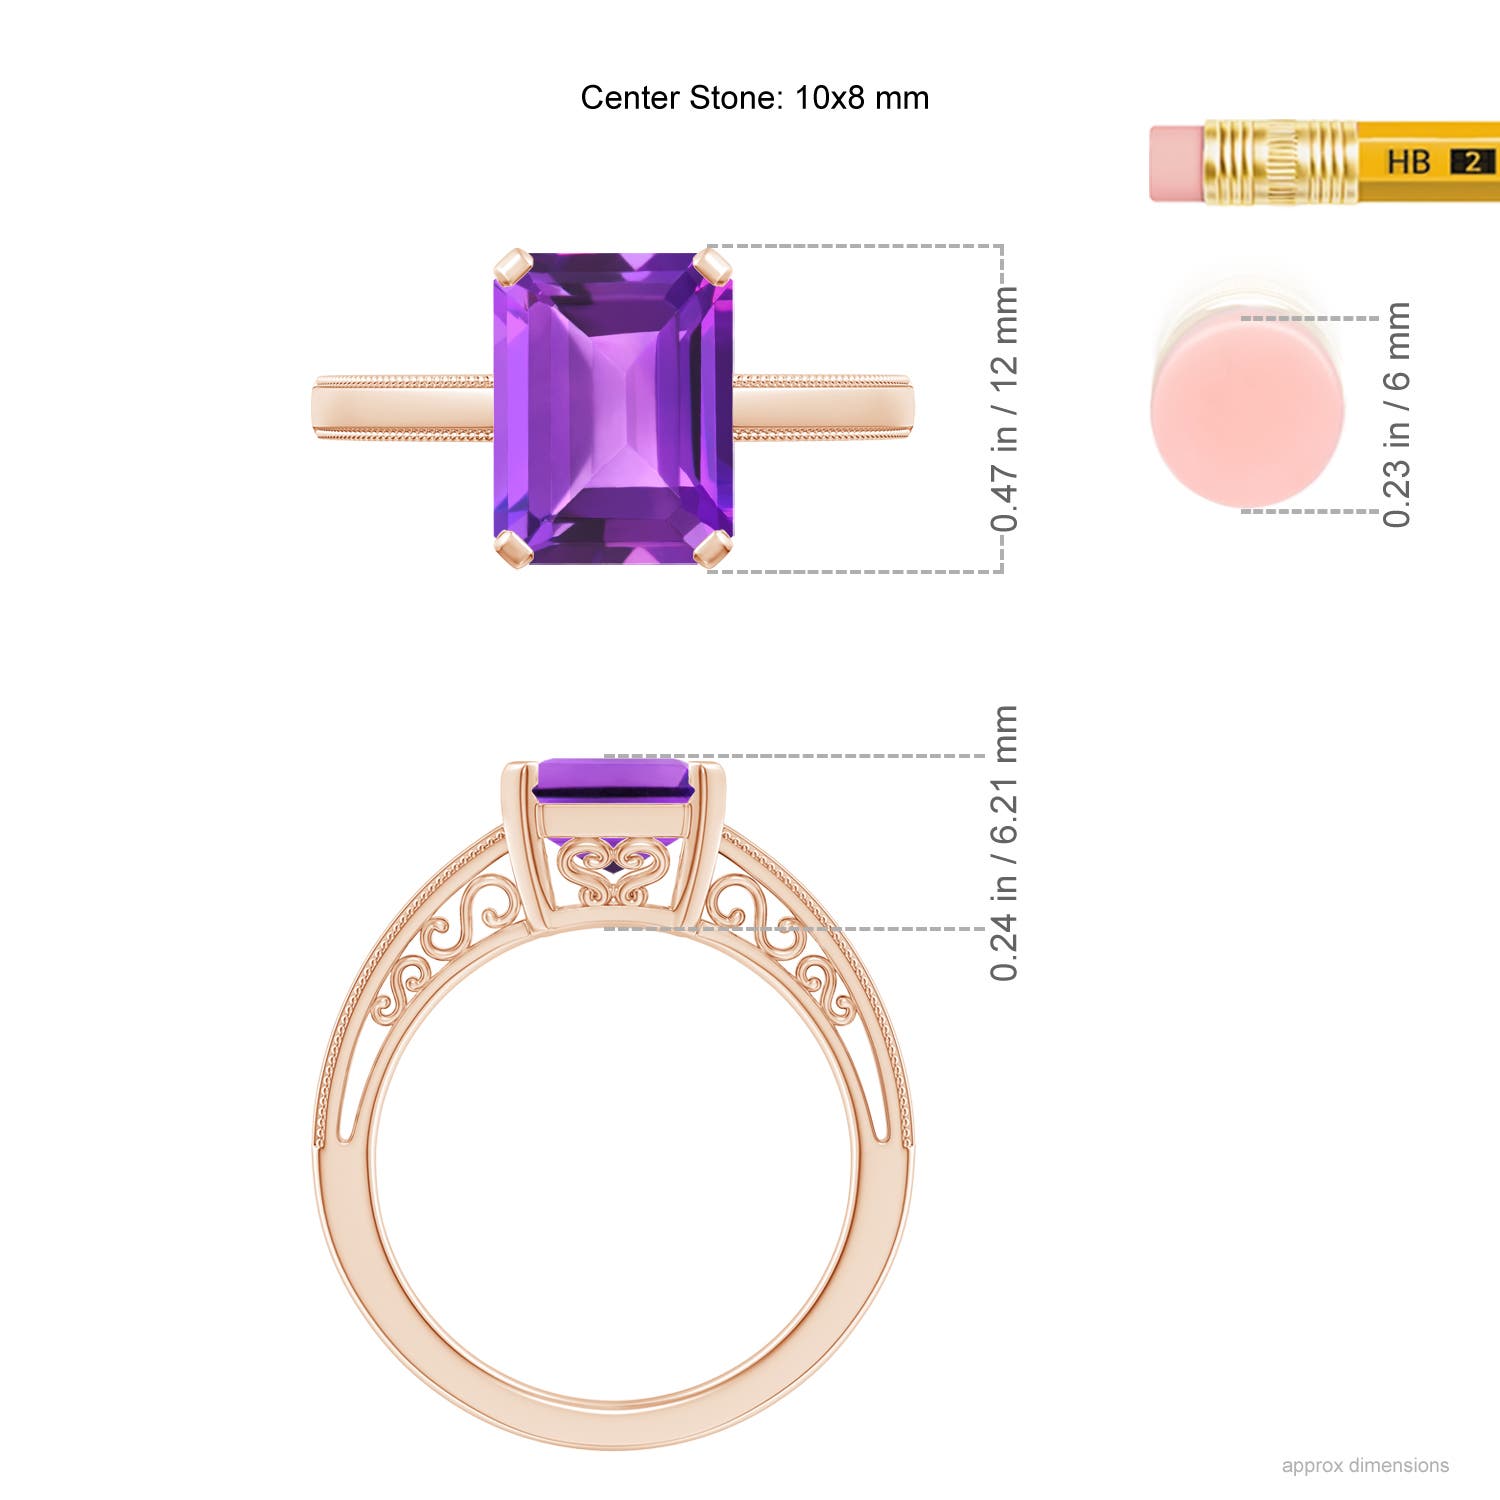 AAA - Amethyst / 2.9 CT / 14 KT Rose Gold